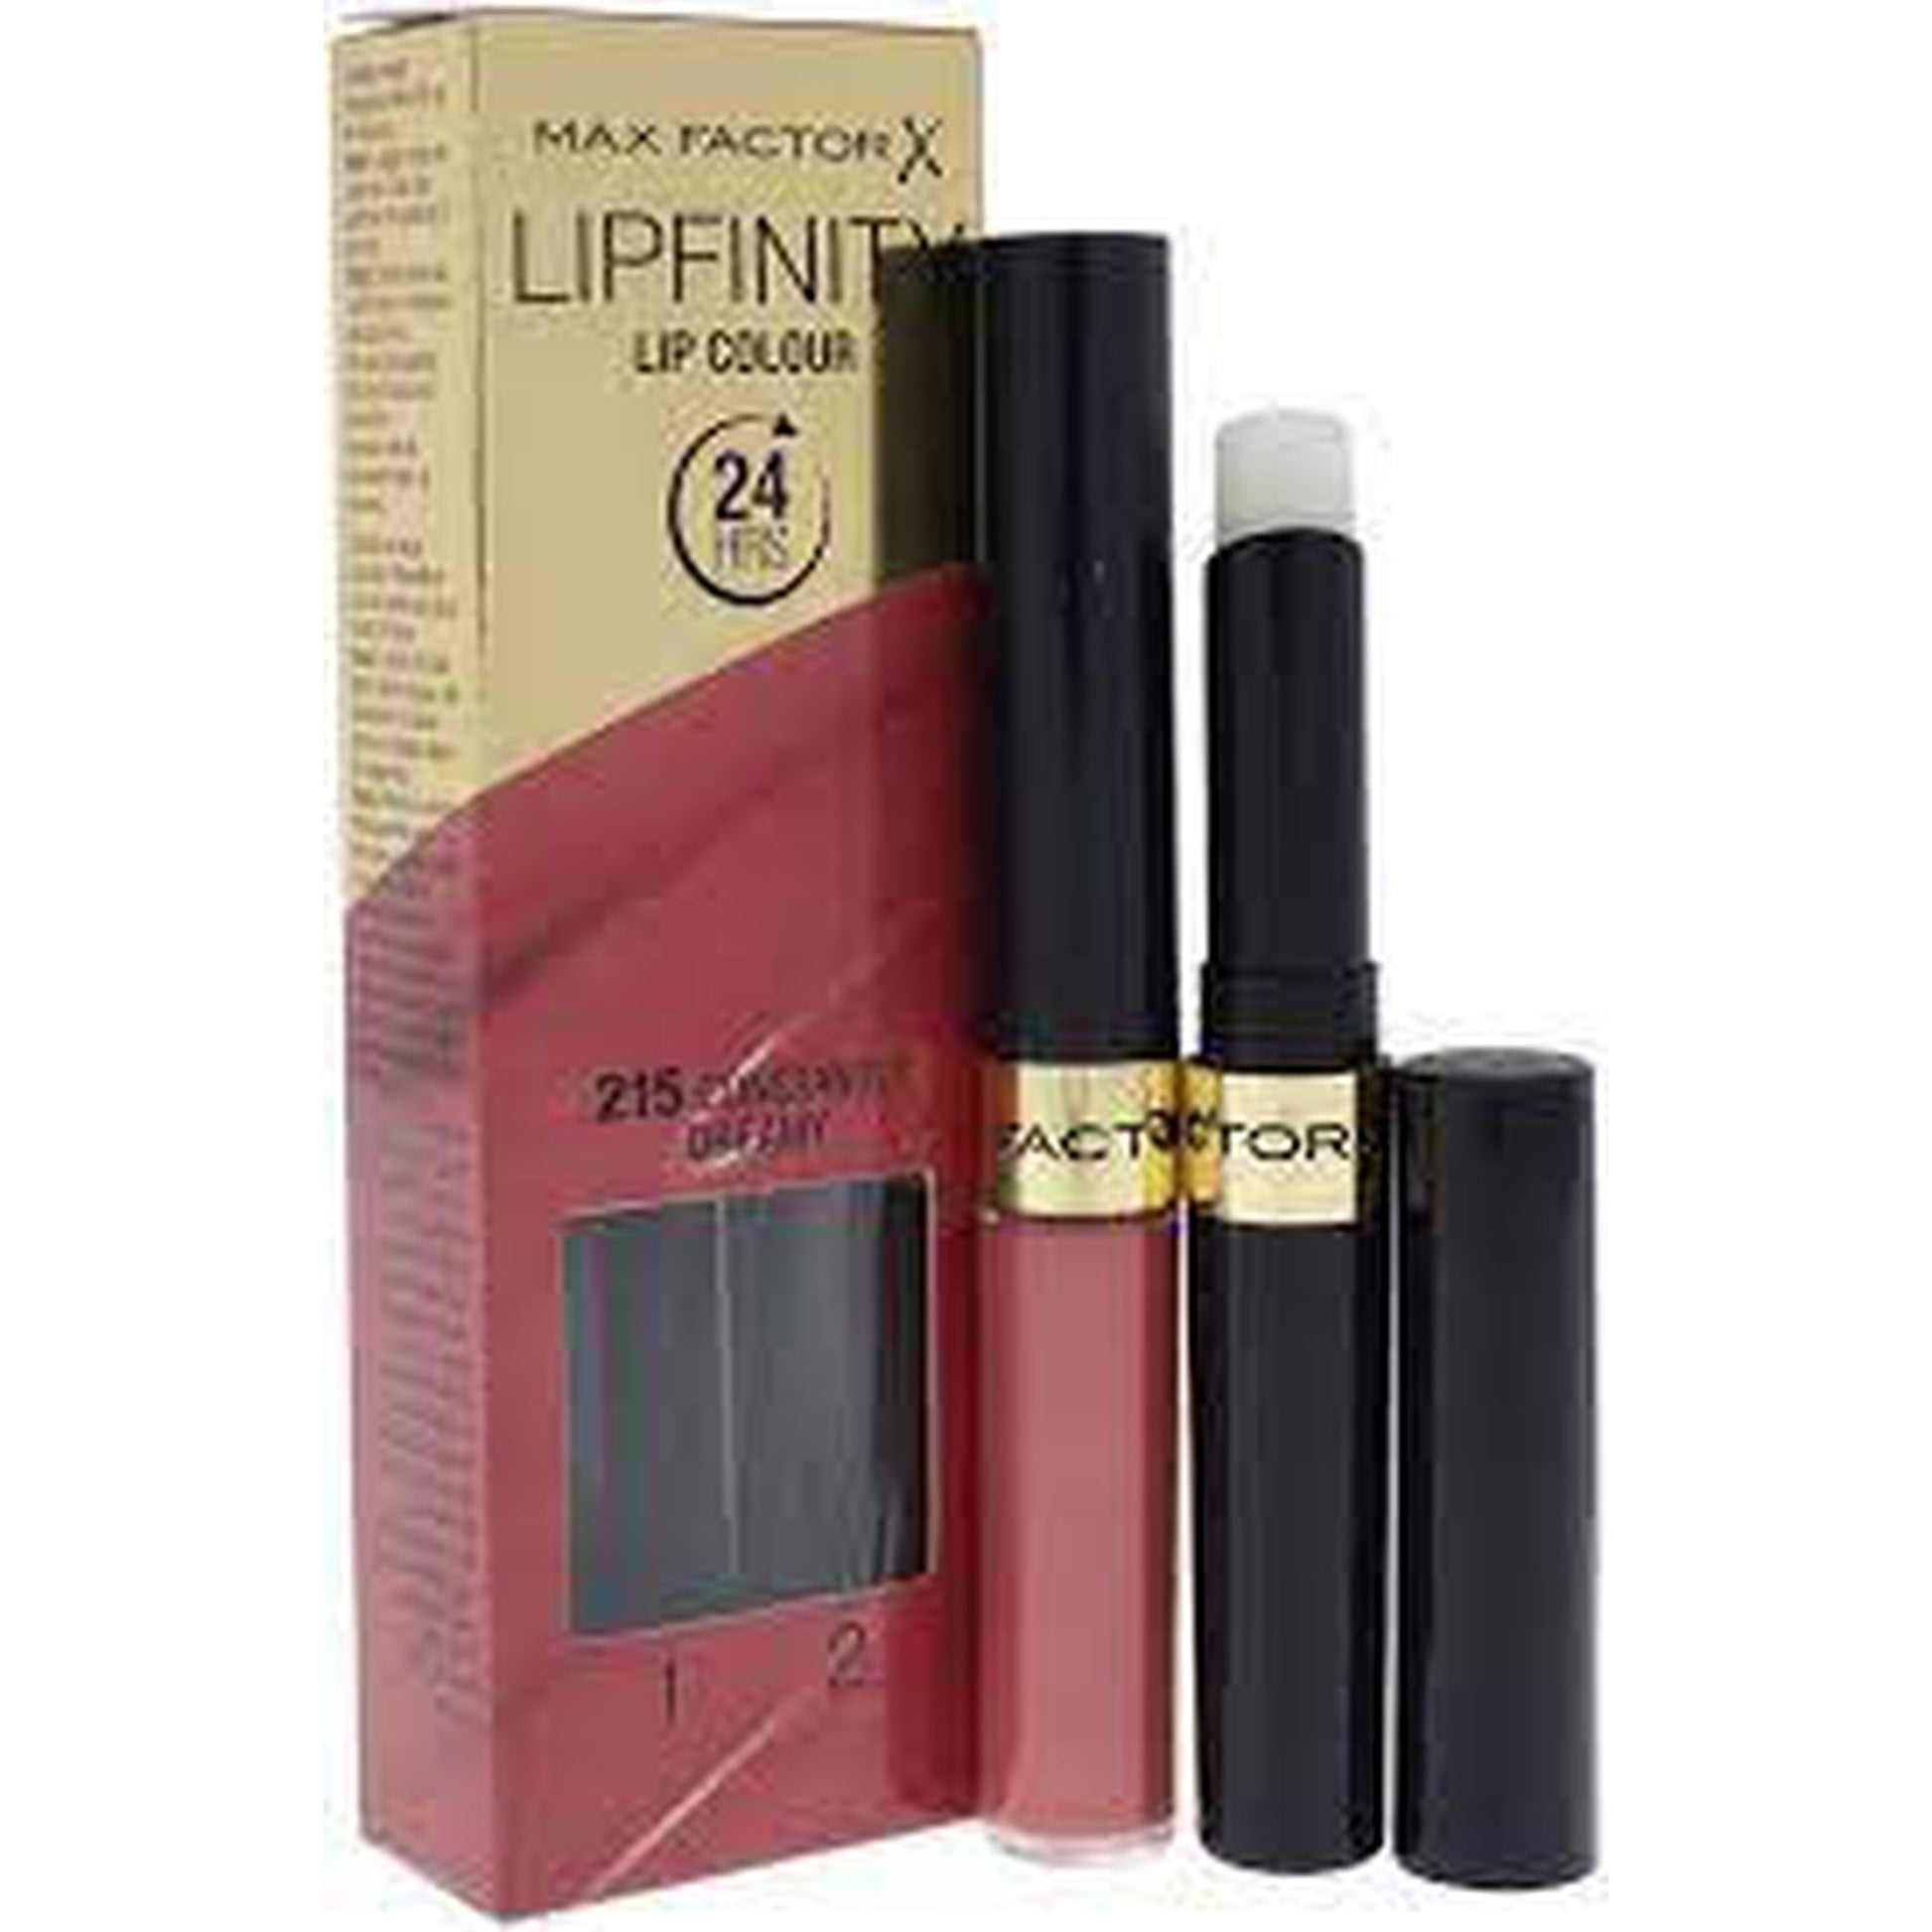 Max Factor Lipfinity Long-Lasting Two Step Lipstick - 215 Constantly Dreamy-Max Factor-BeautyNmakeup.co.uk